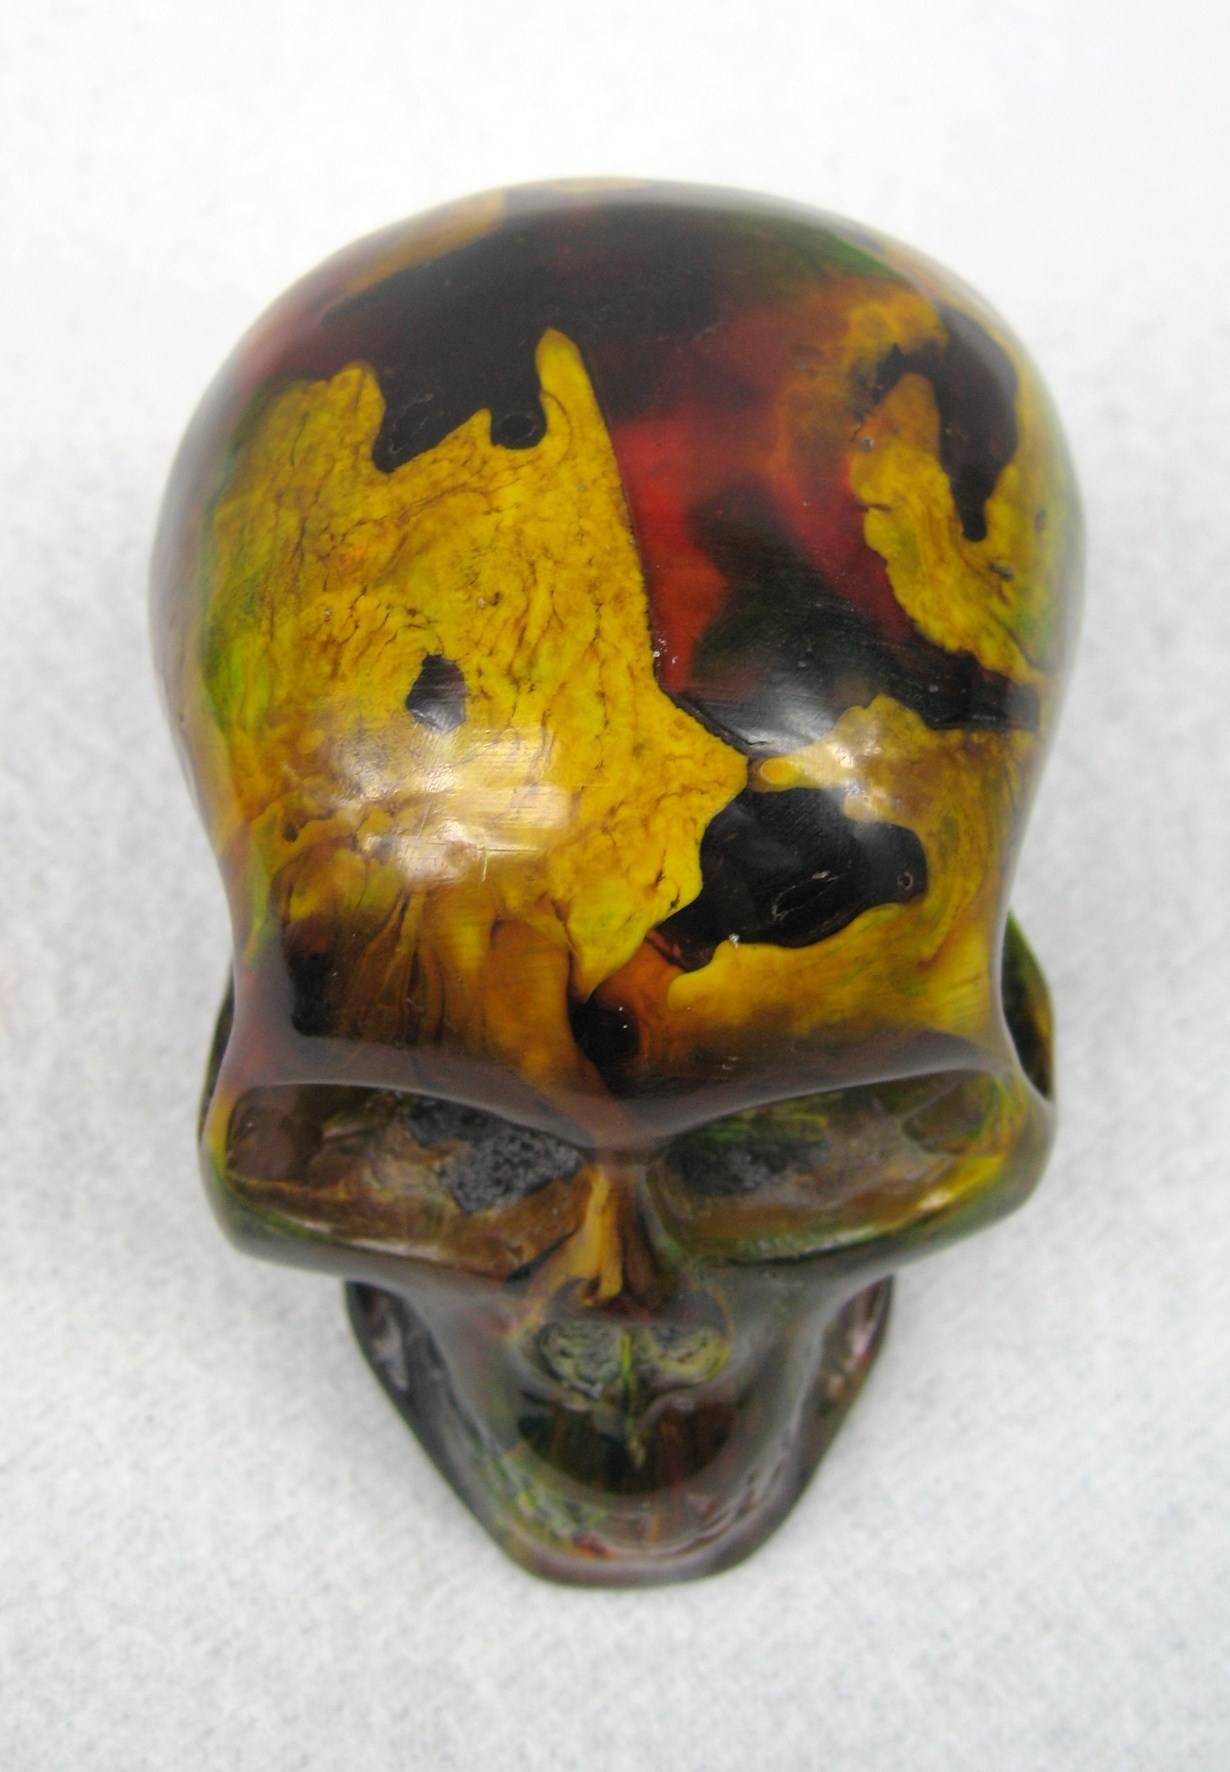 Wonderful color on this end of day bakelite Catalin skull. A show stopper! Vibrant yellows, greens, and more fabulous colors. A great addition to your decor. Please be sure to check our storefront for more wonderful decorating pieces that range from